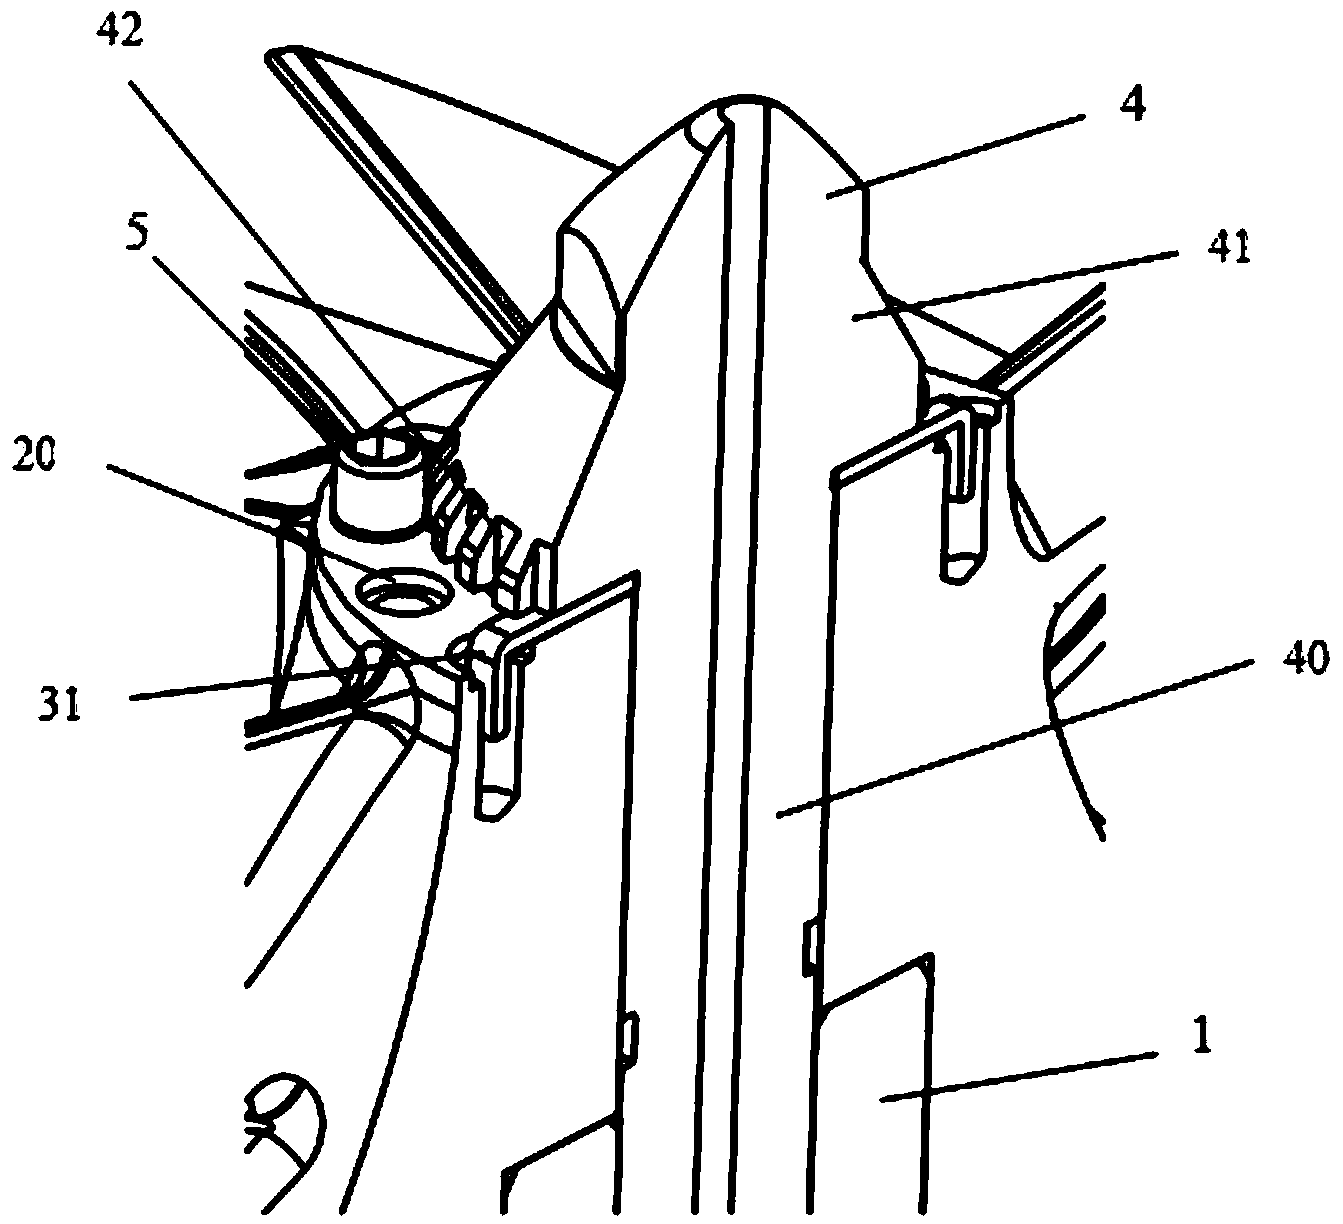 Air guide impeller assembly of centrifugal blower